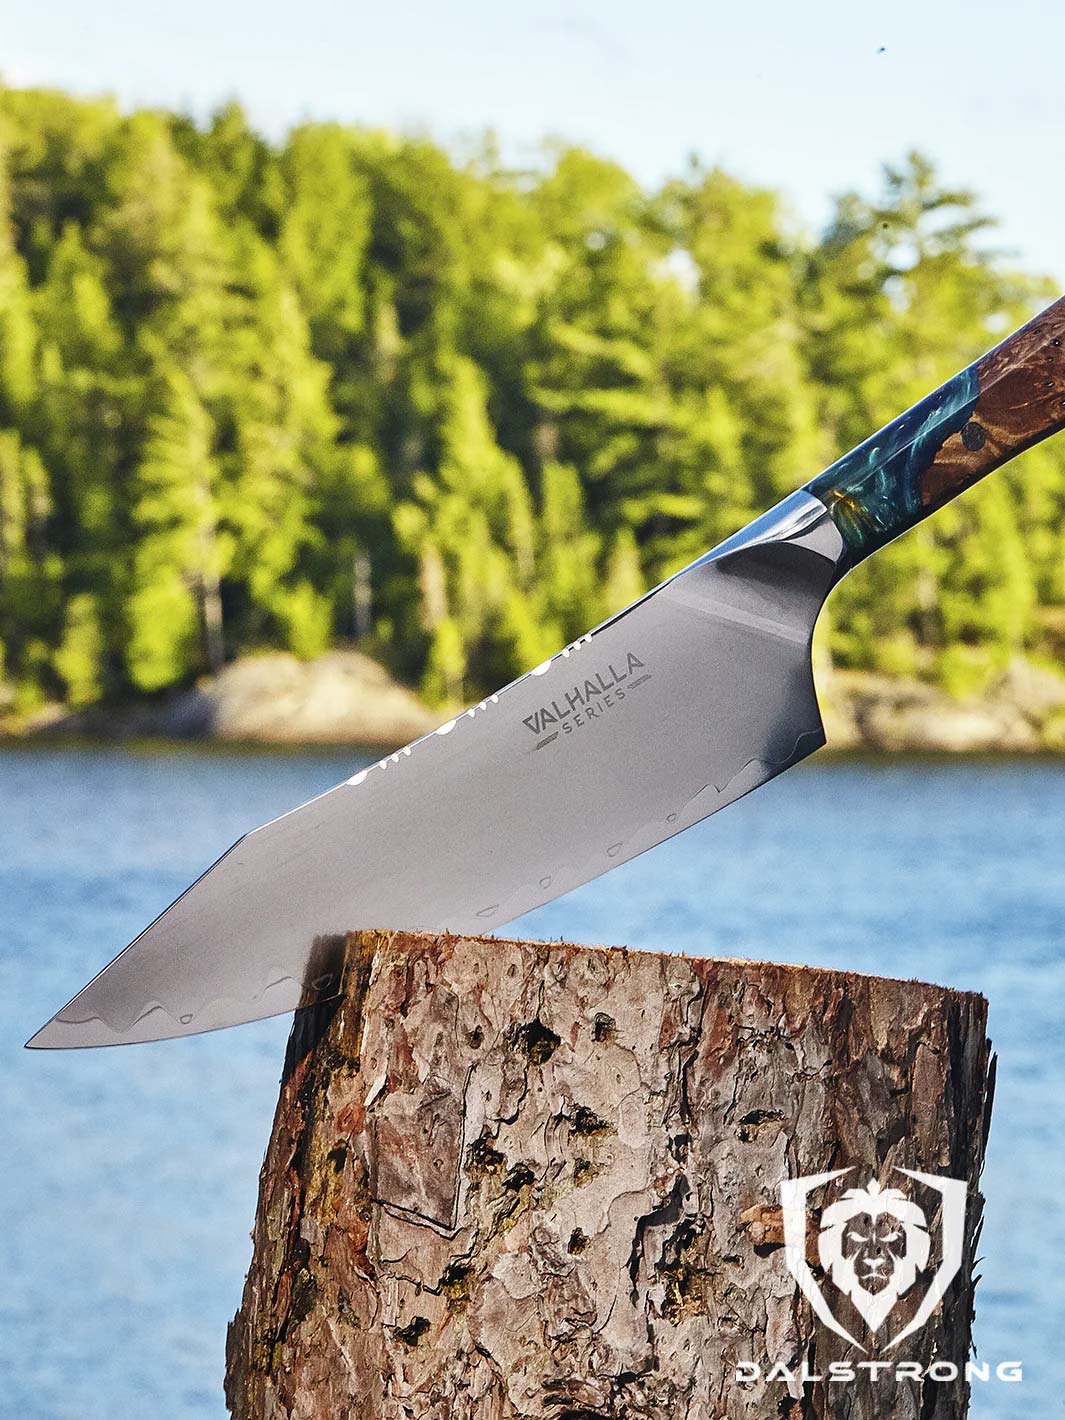 Dalstrong valhalla series 9.5 inch chef knife with wooden handle on a log.